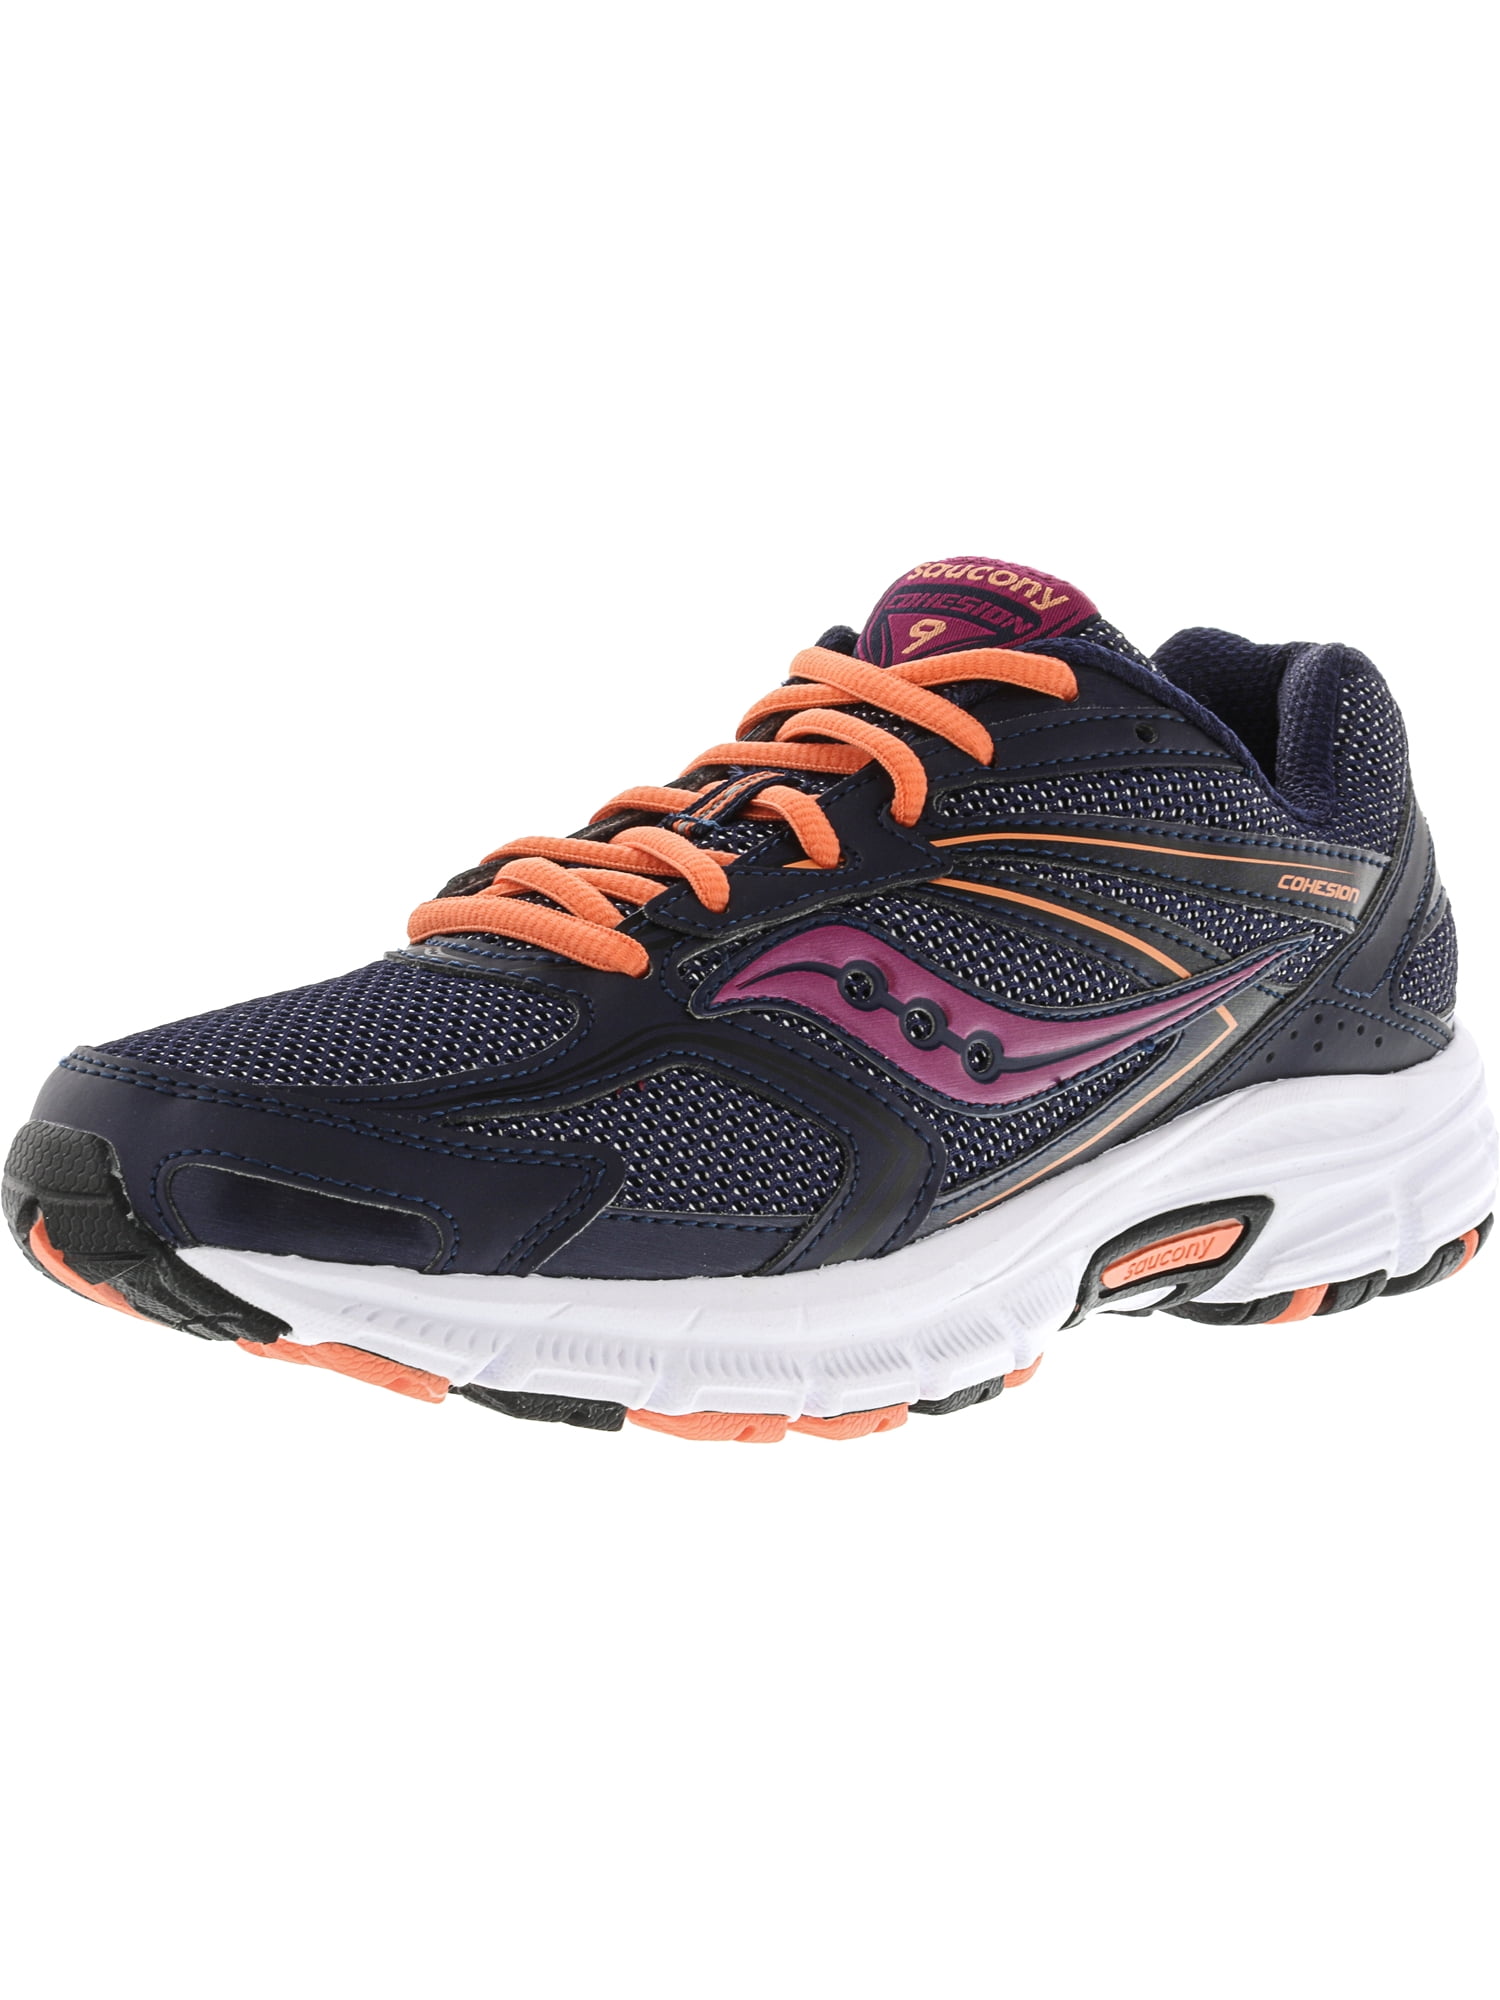 saucony kids' preschool cohesion 9 ac running shoes